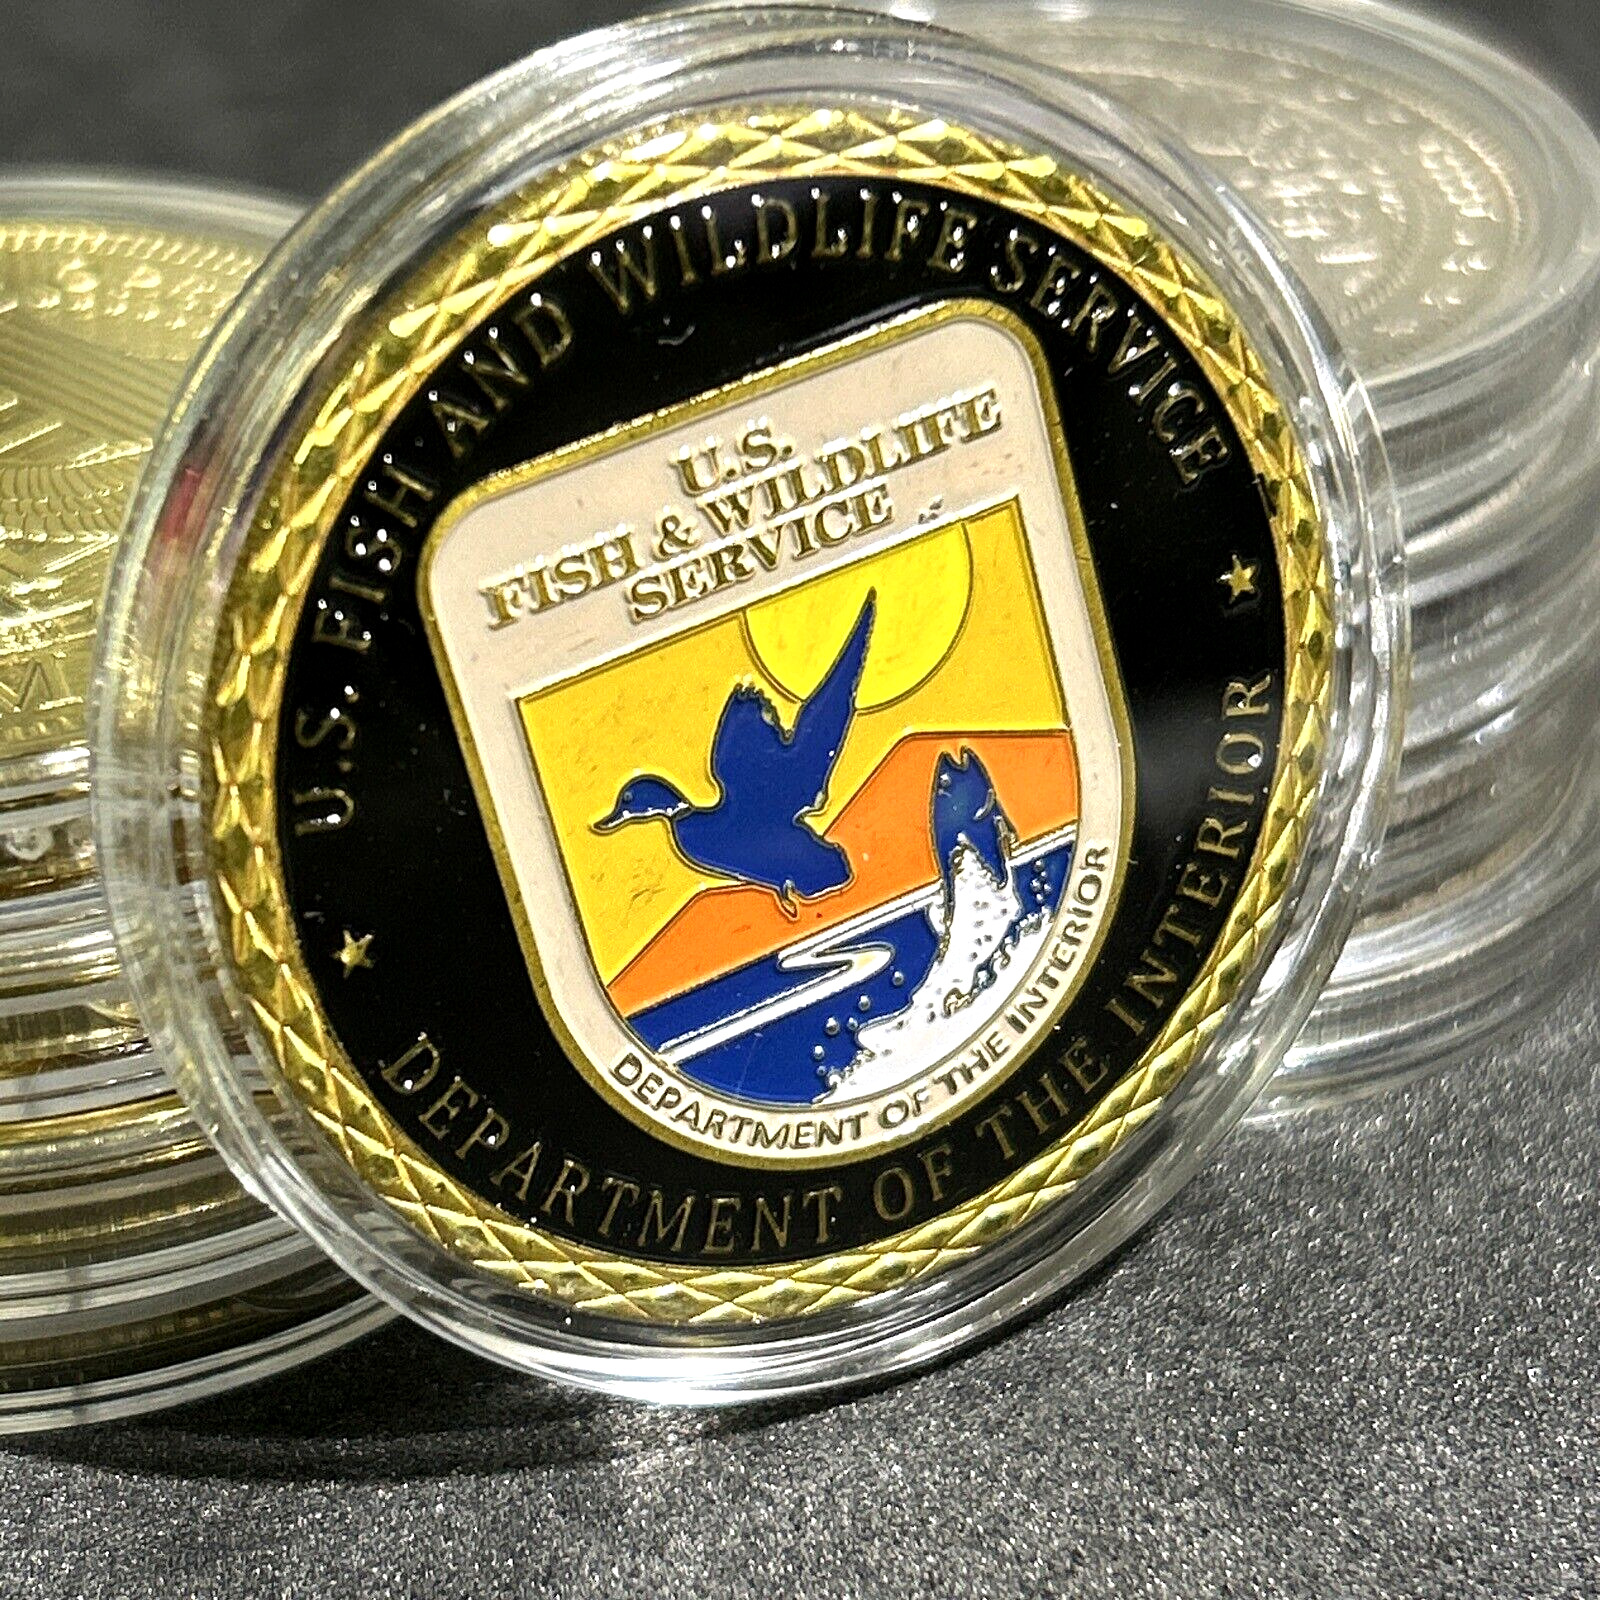 US FISH & WILDLIFE SERVICE-DEPT OF THE INTERIOR Challenge Coin NEW